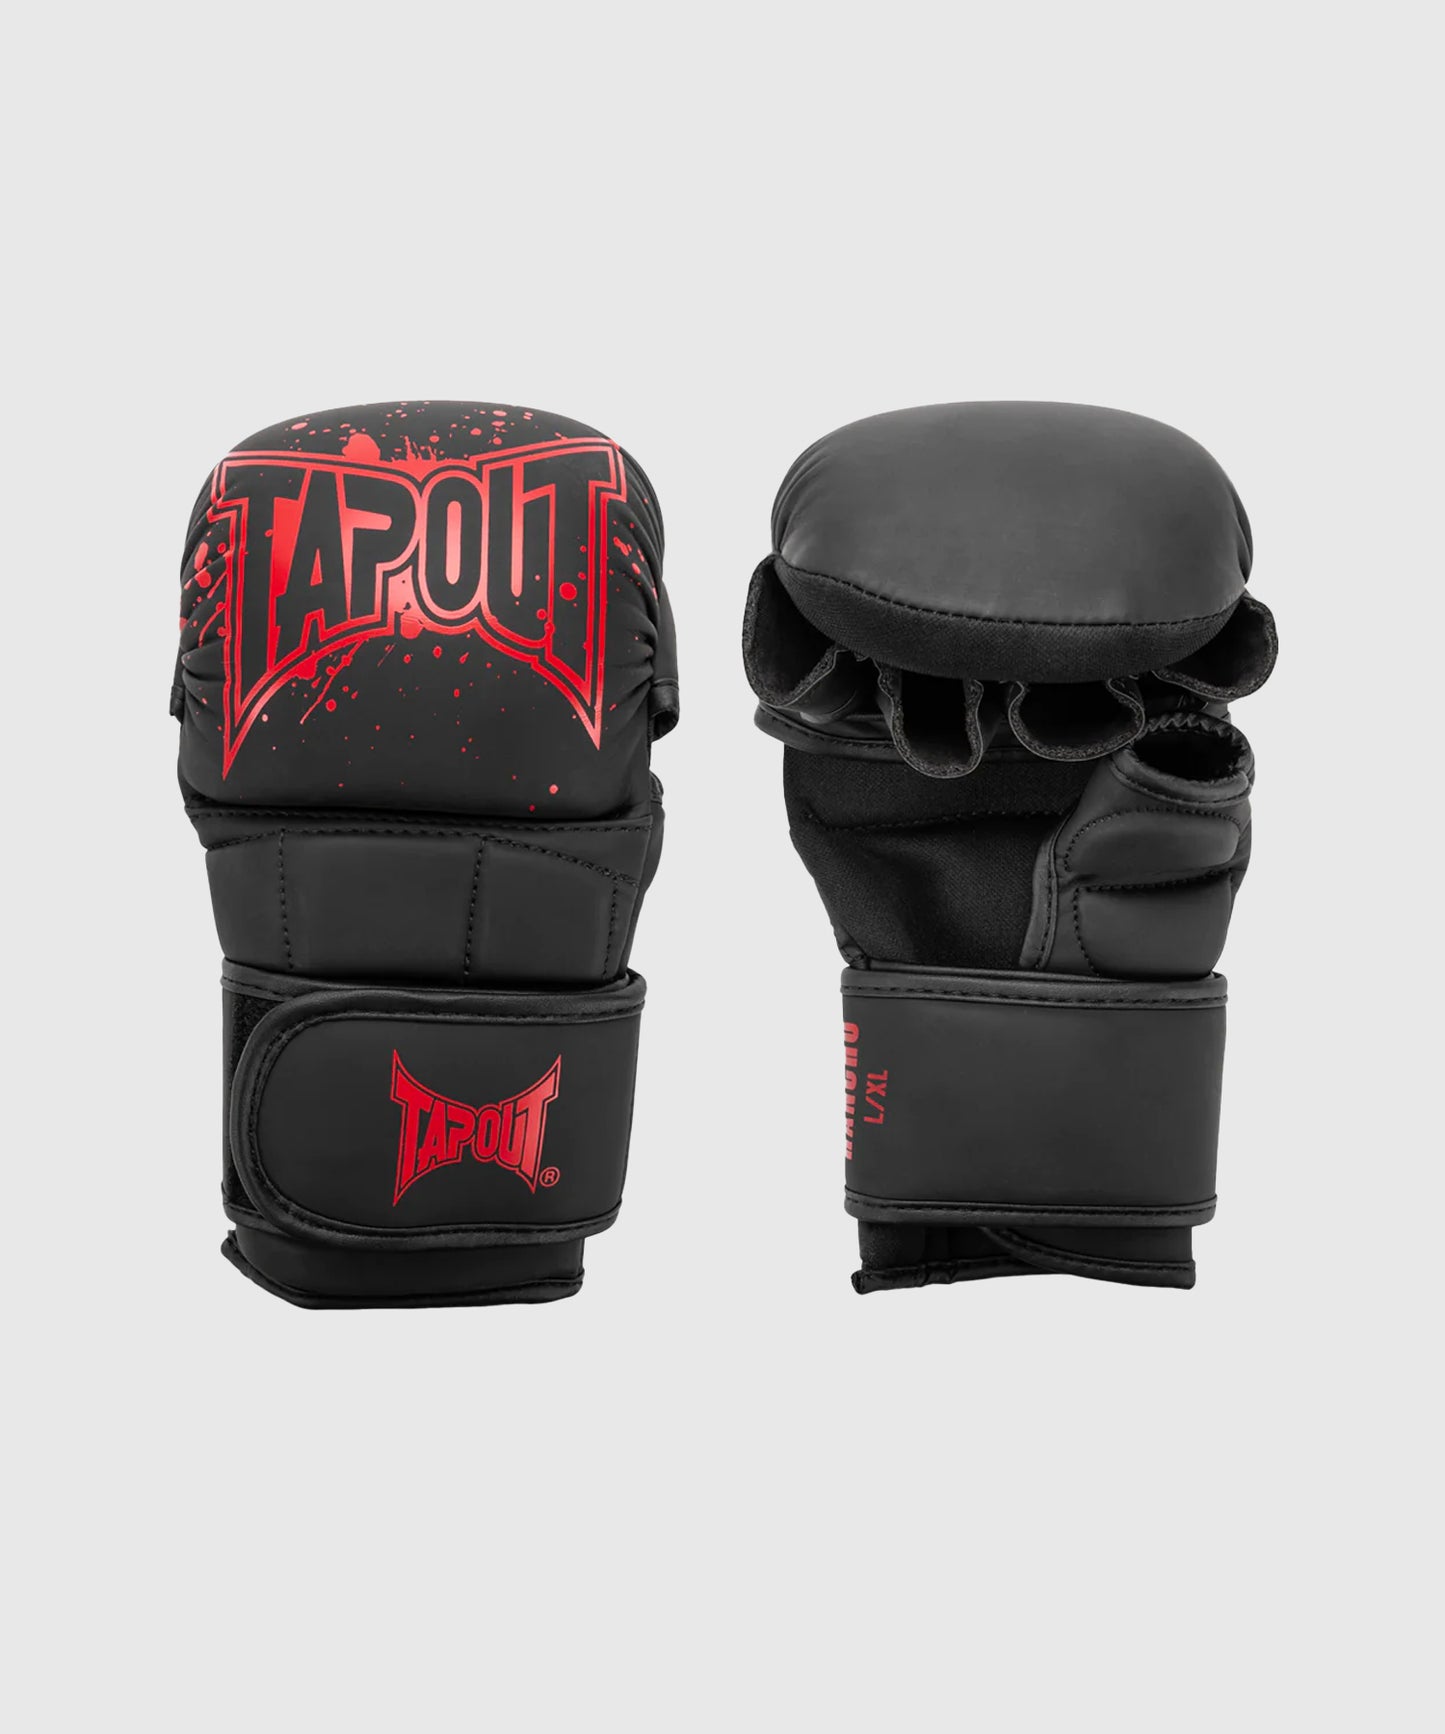 Tapout Rancho Mma Sparring-Handschuhe - Schwarz/Rot